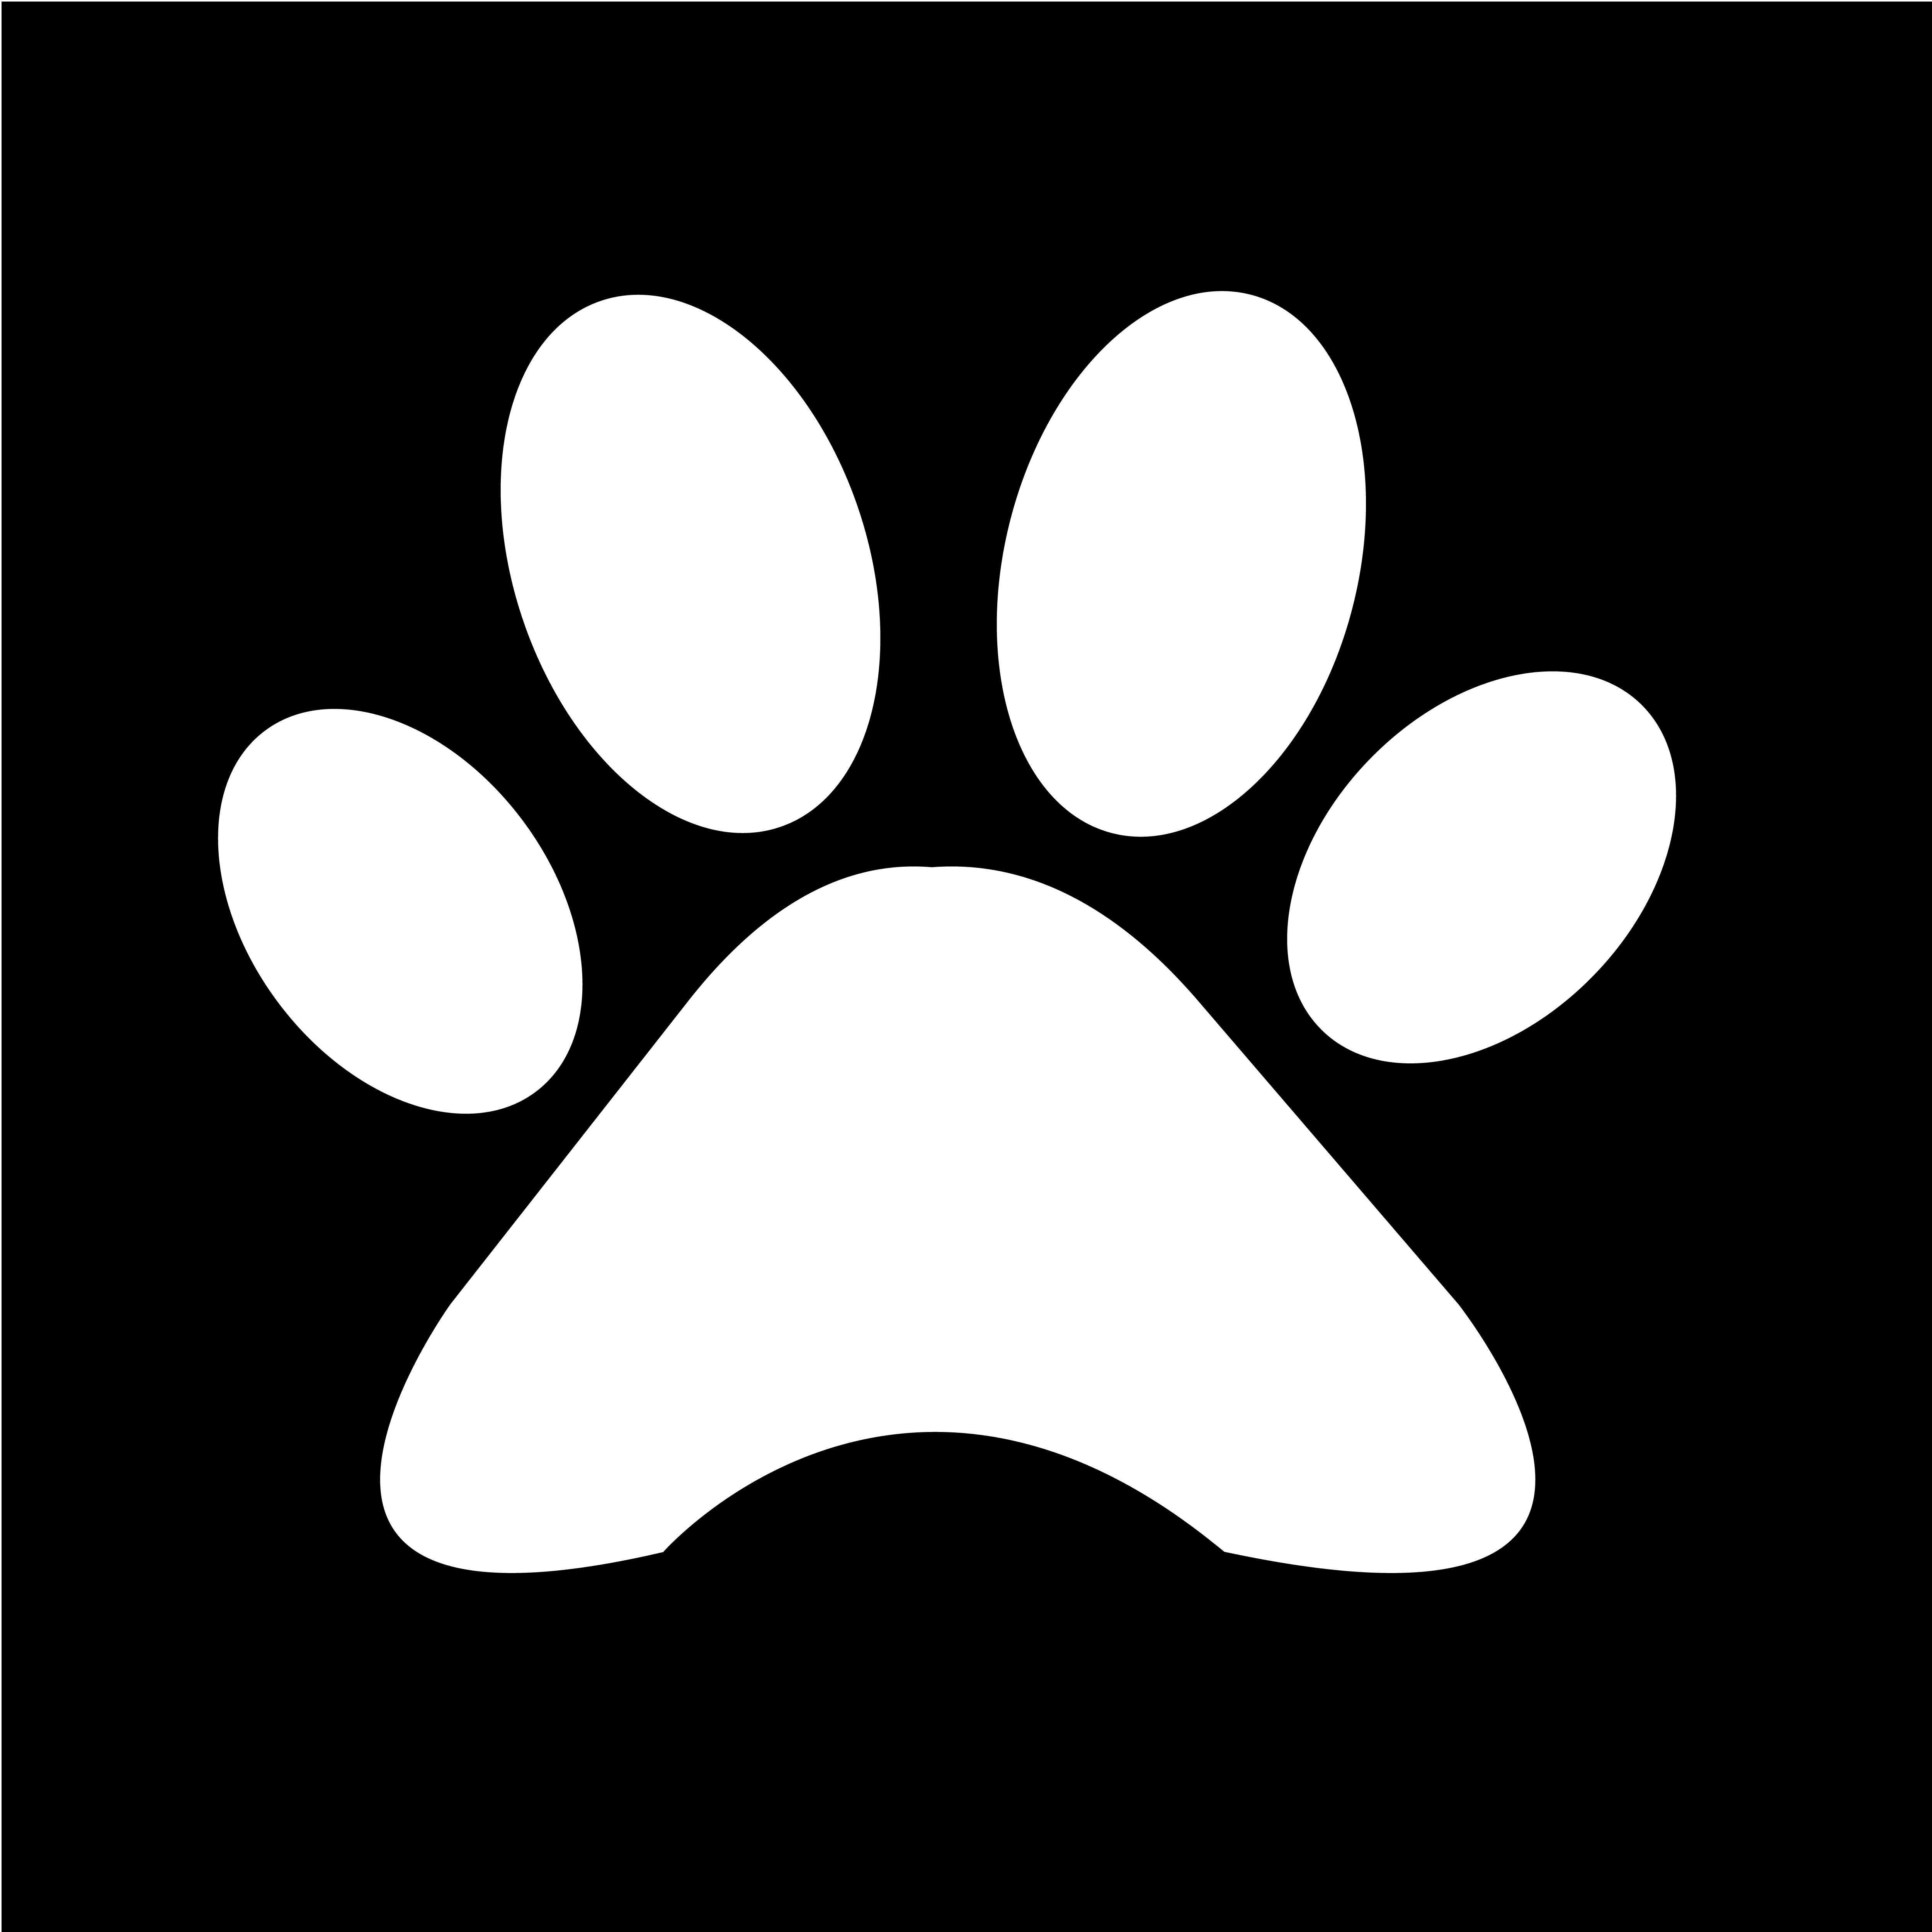 Download animal paw print icon - Download Free Vectors, Clipart Graphics & Vector Art